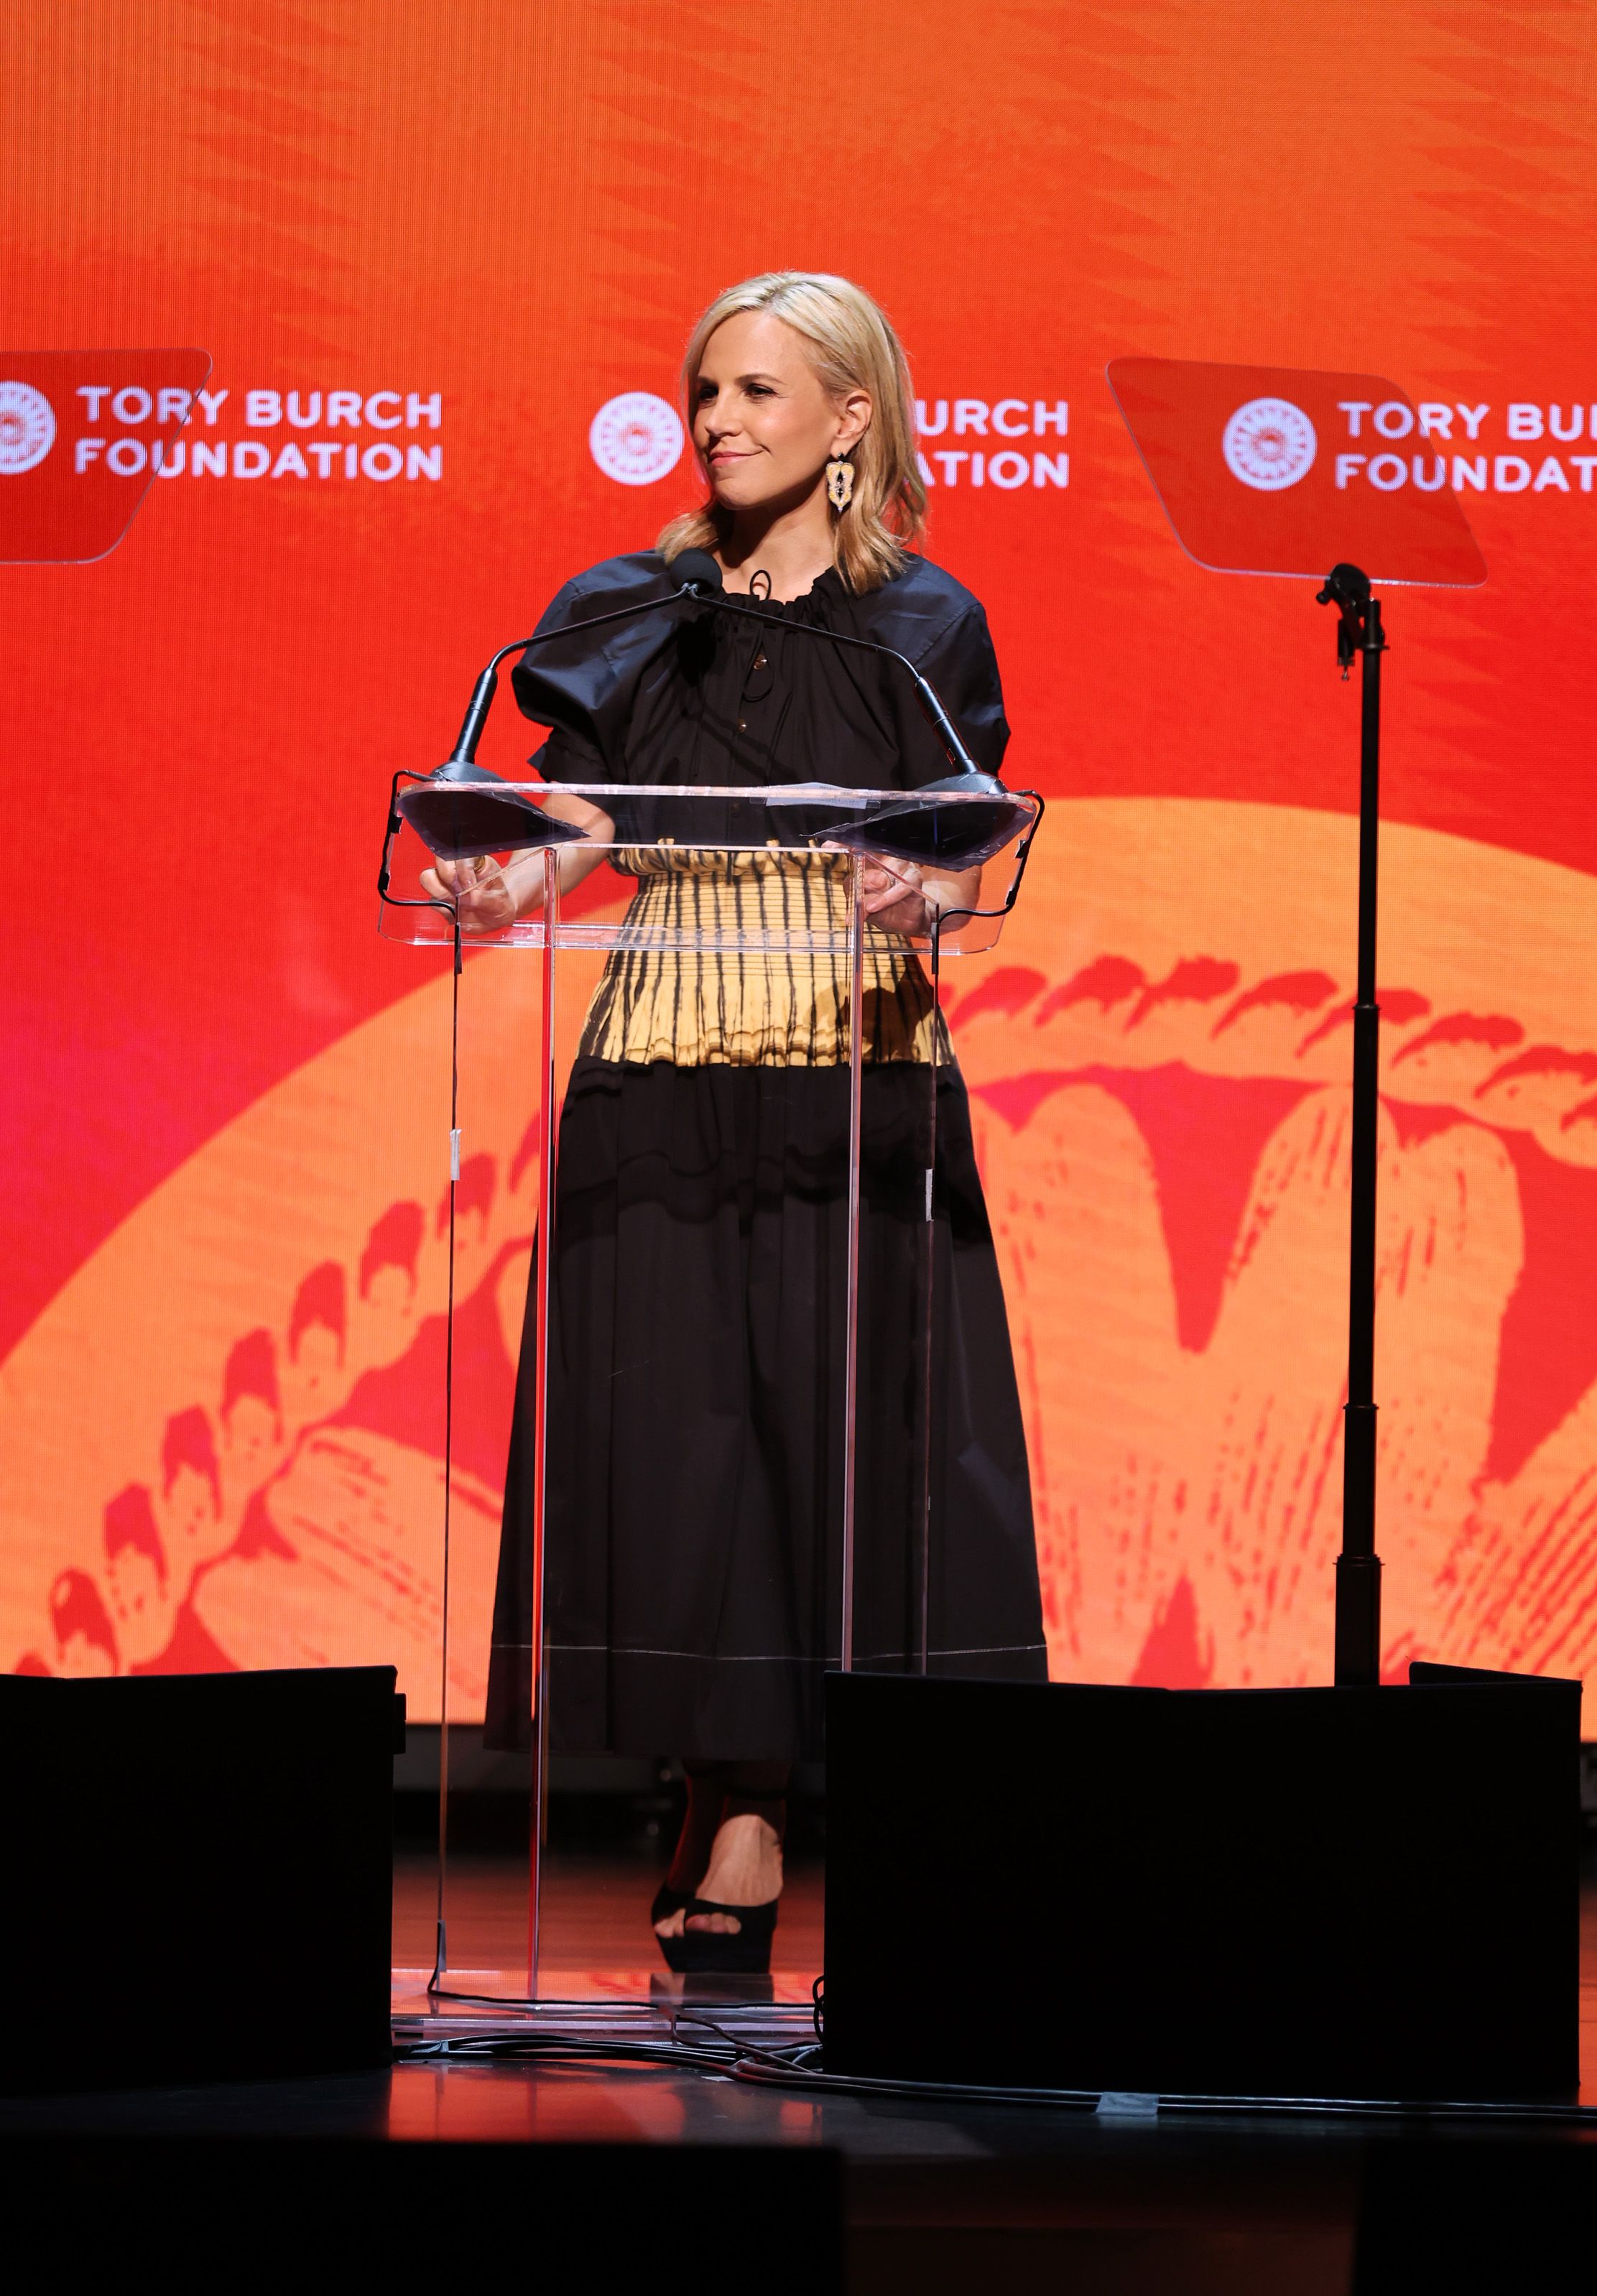 Billie Jean King and Tory Burch on Changing the Game for Women—in